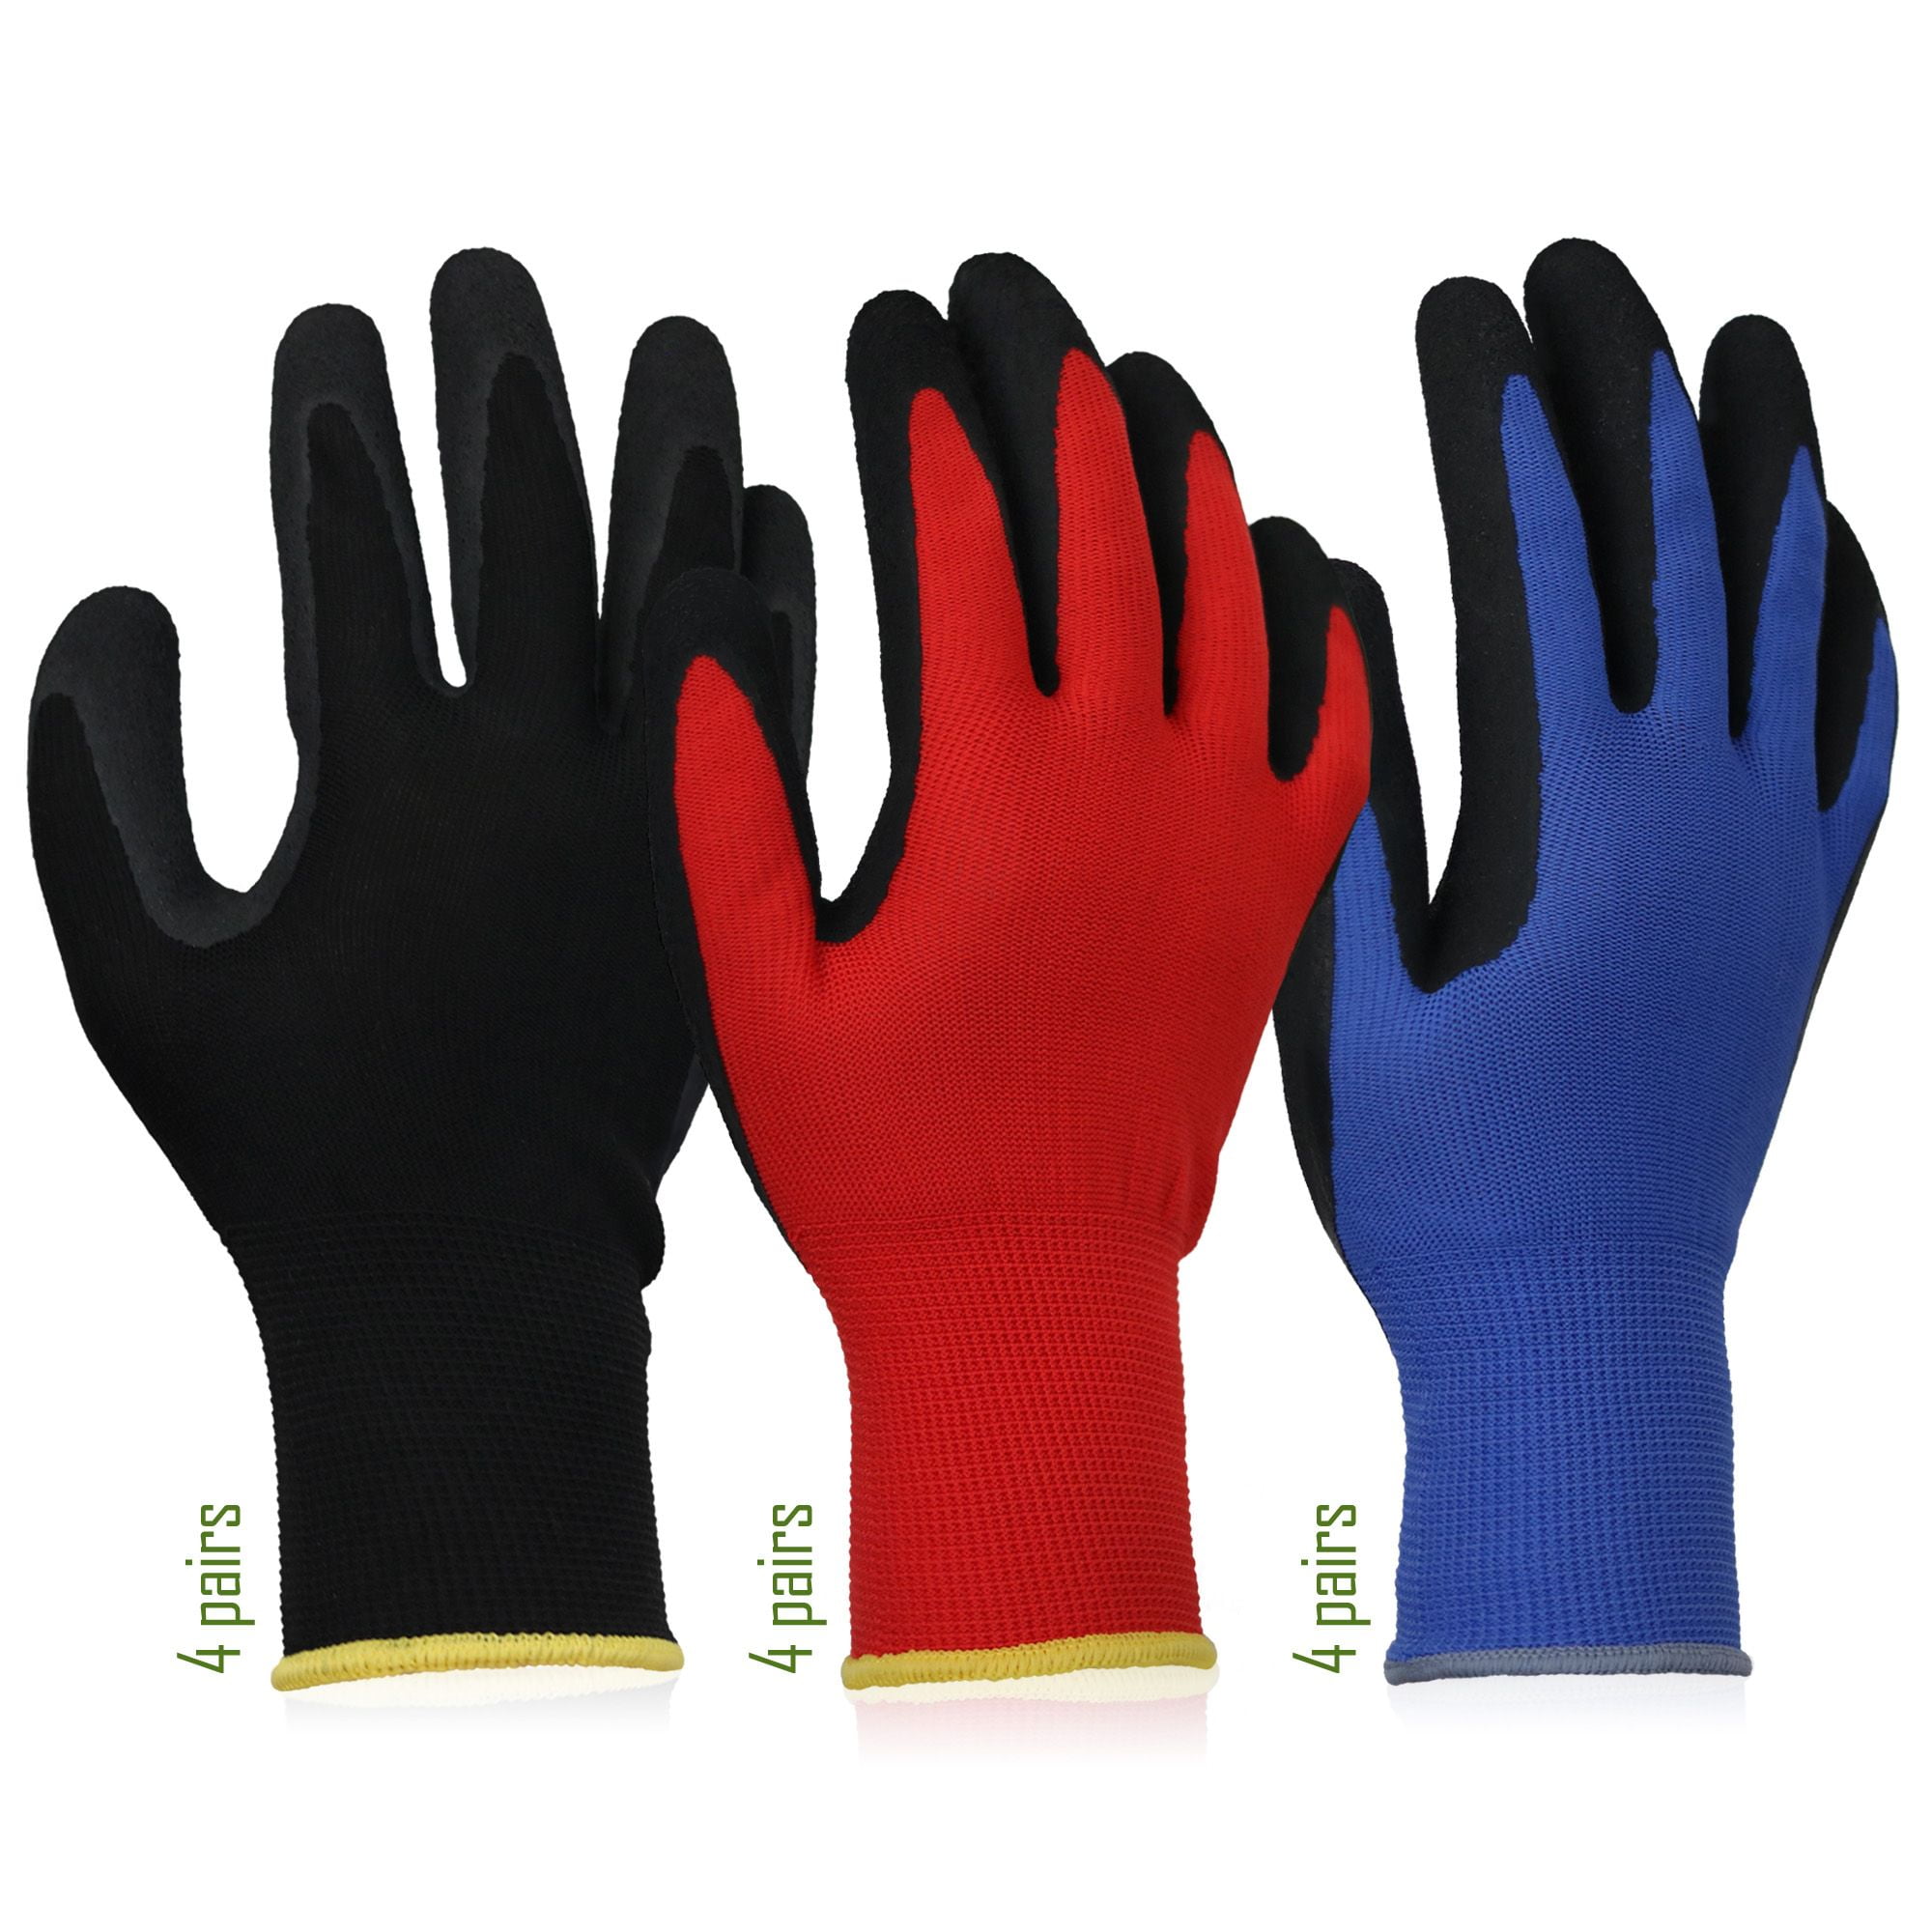 Superior Grip Latex Coated Gardening Gloves Size 9 L 